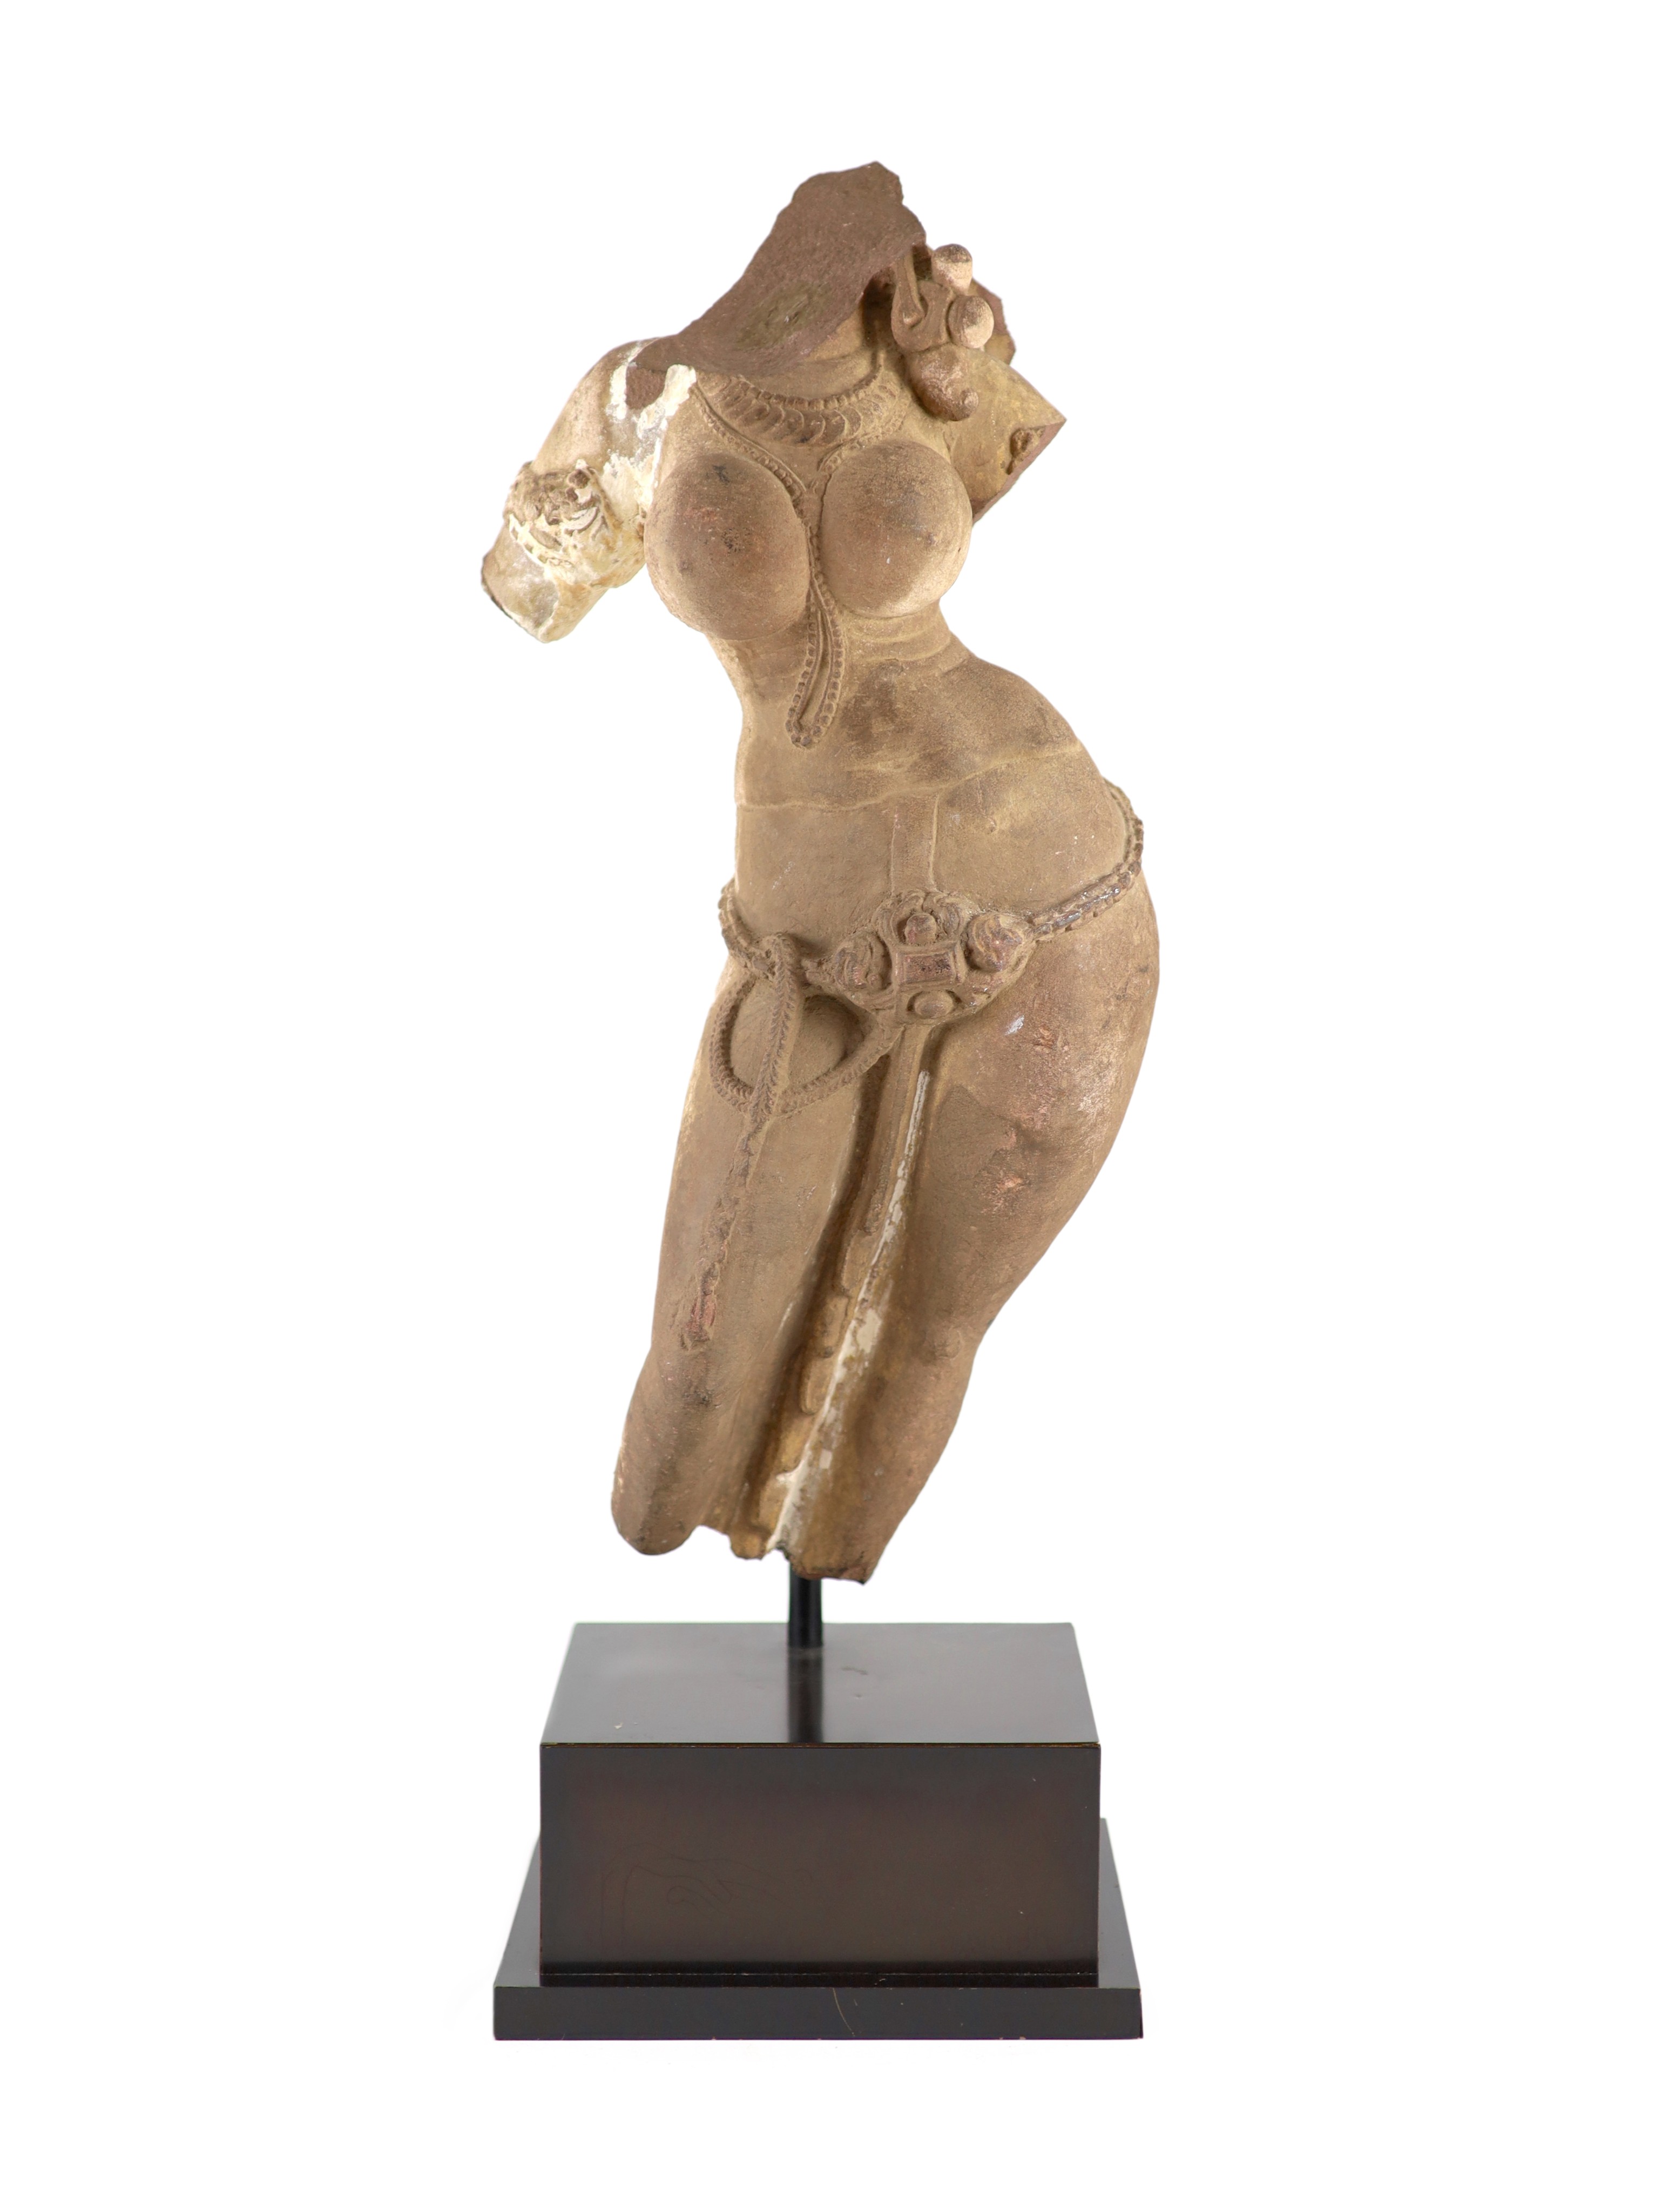 A Central Indian red sandstone torso of a Goddess, Madhya Pradesh, 10th/11th century, Total height including later metal stand 61 cm